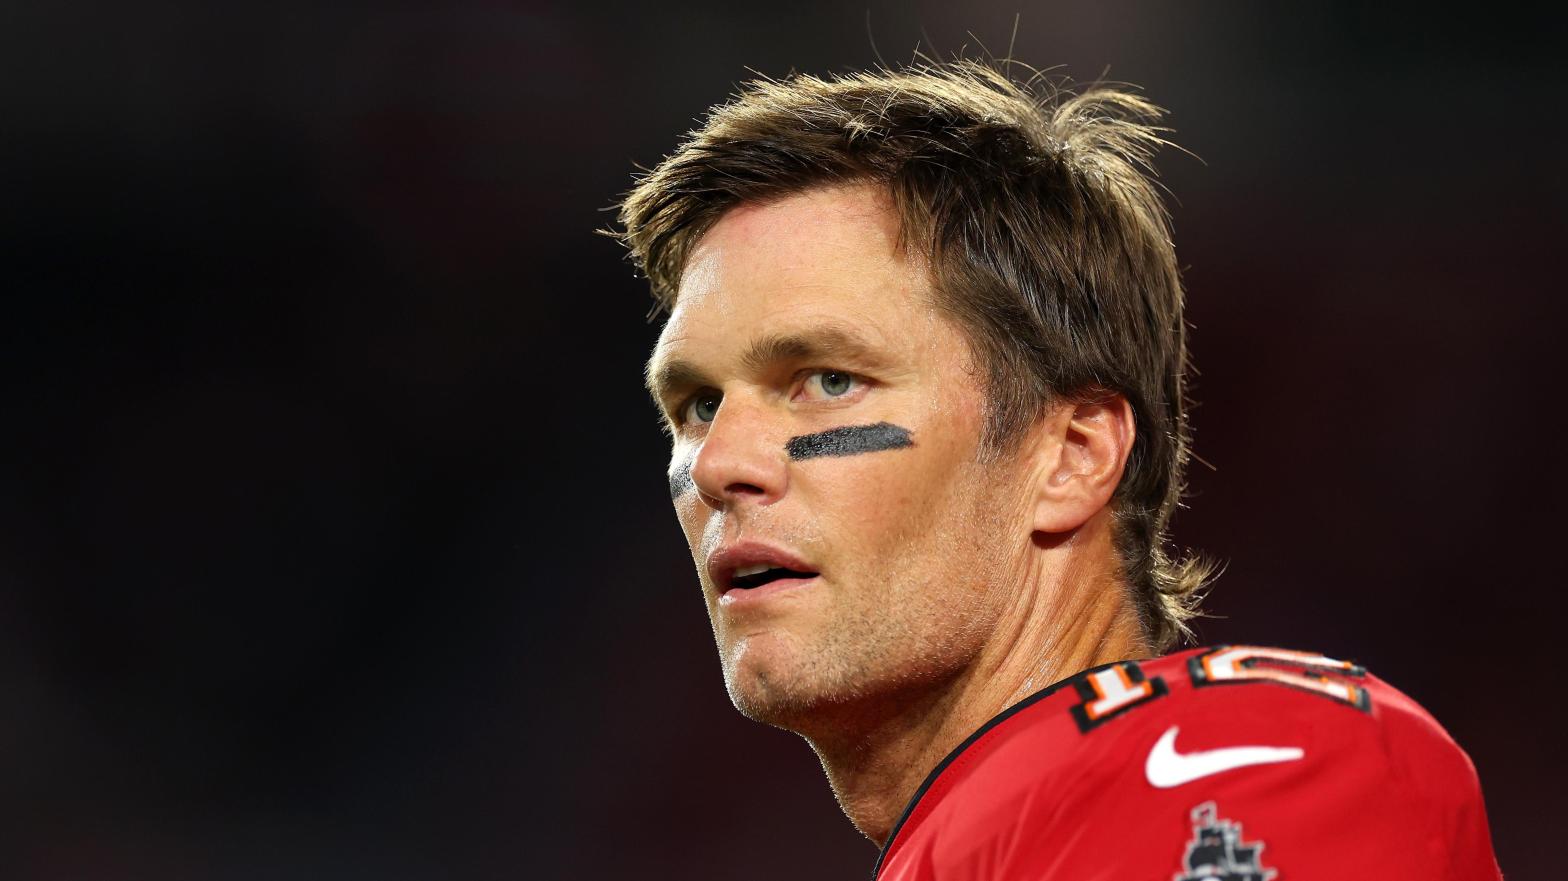 Tom Brady, the quarterback of the Miami Buccaneers, had announced a brand ambassador partnership with FTX back in 2021. (Photo: Mike Ehrmann, Getty Images)